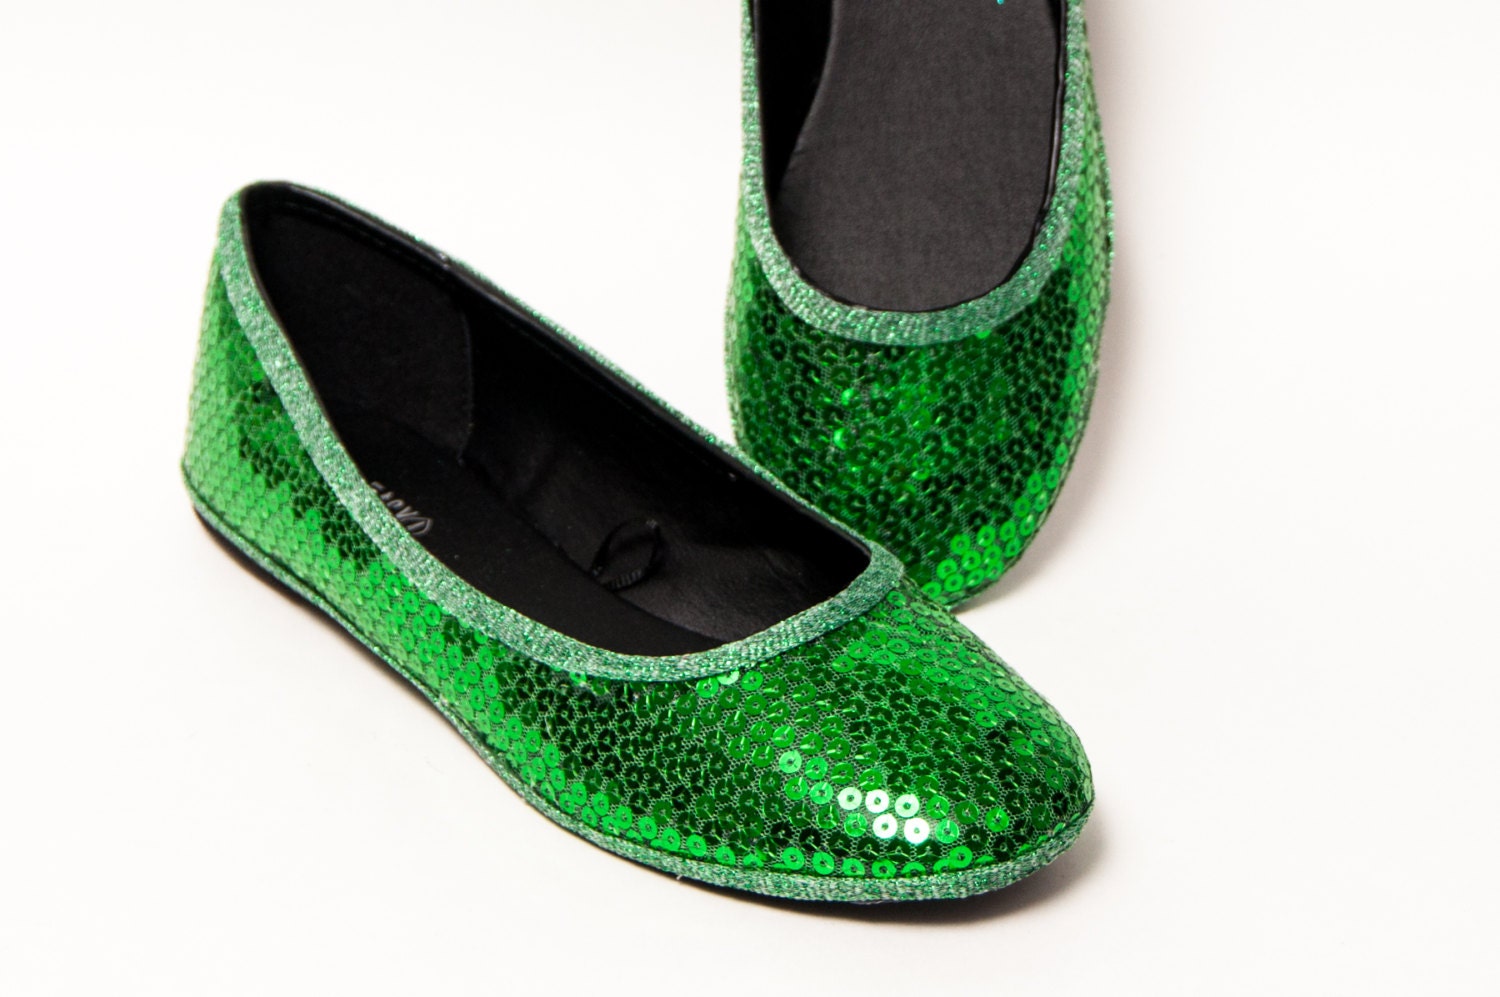 Sequin Kelly Green Ballet Flat Slippers Shoes